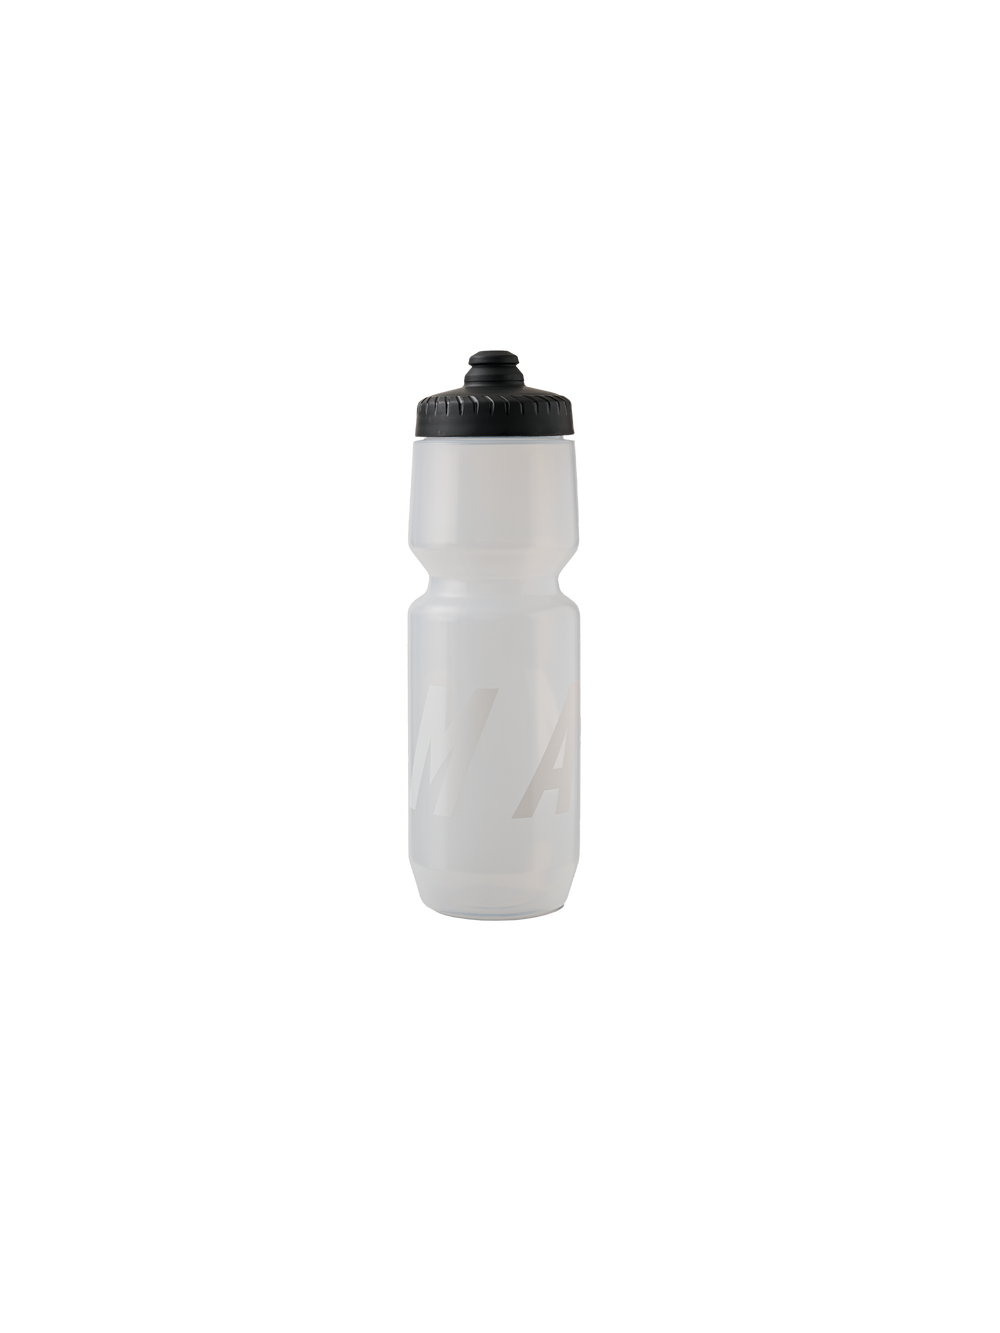 Product Image for Core Bottle Large